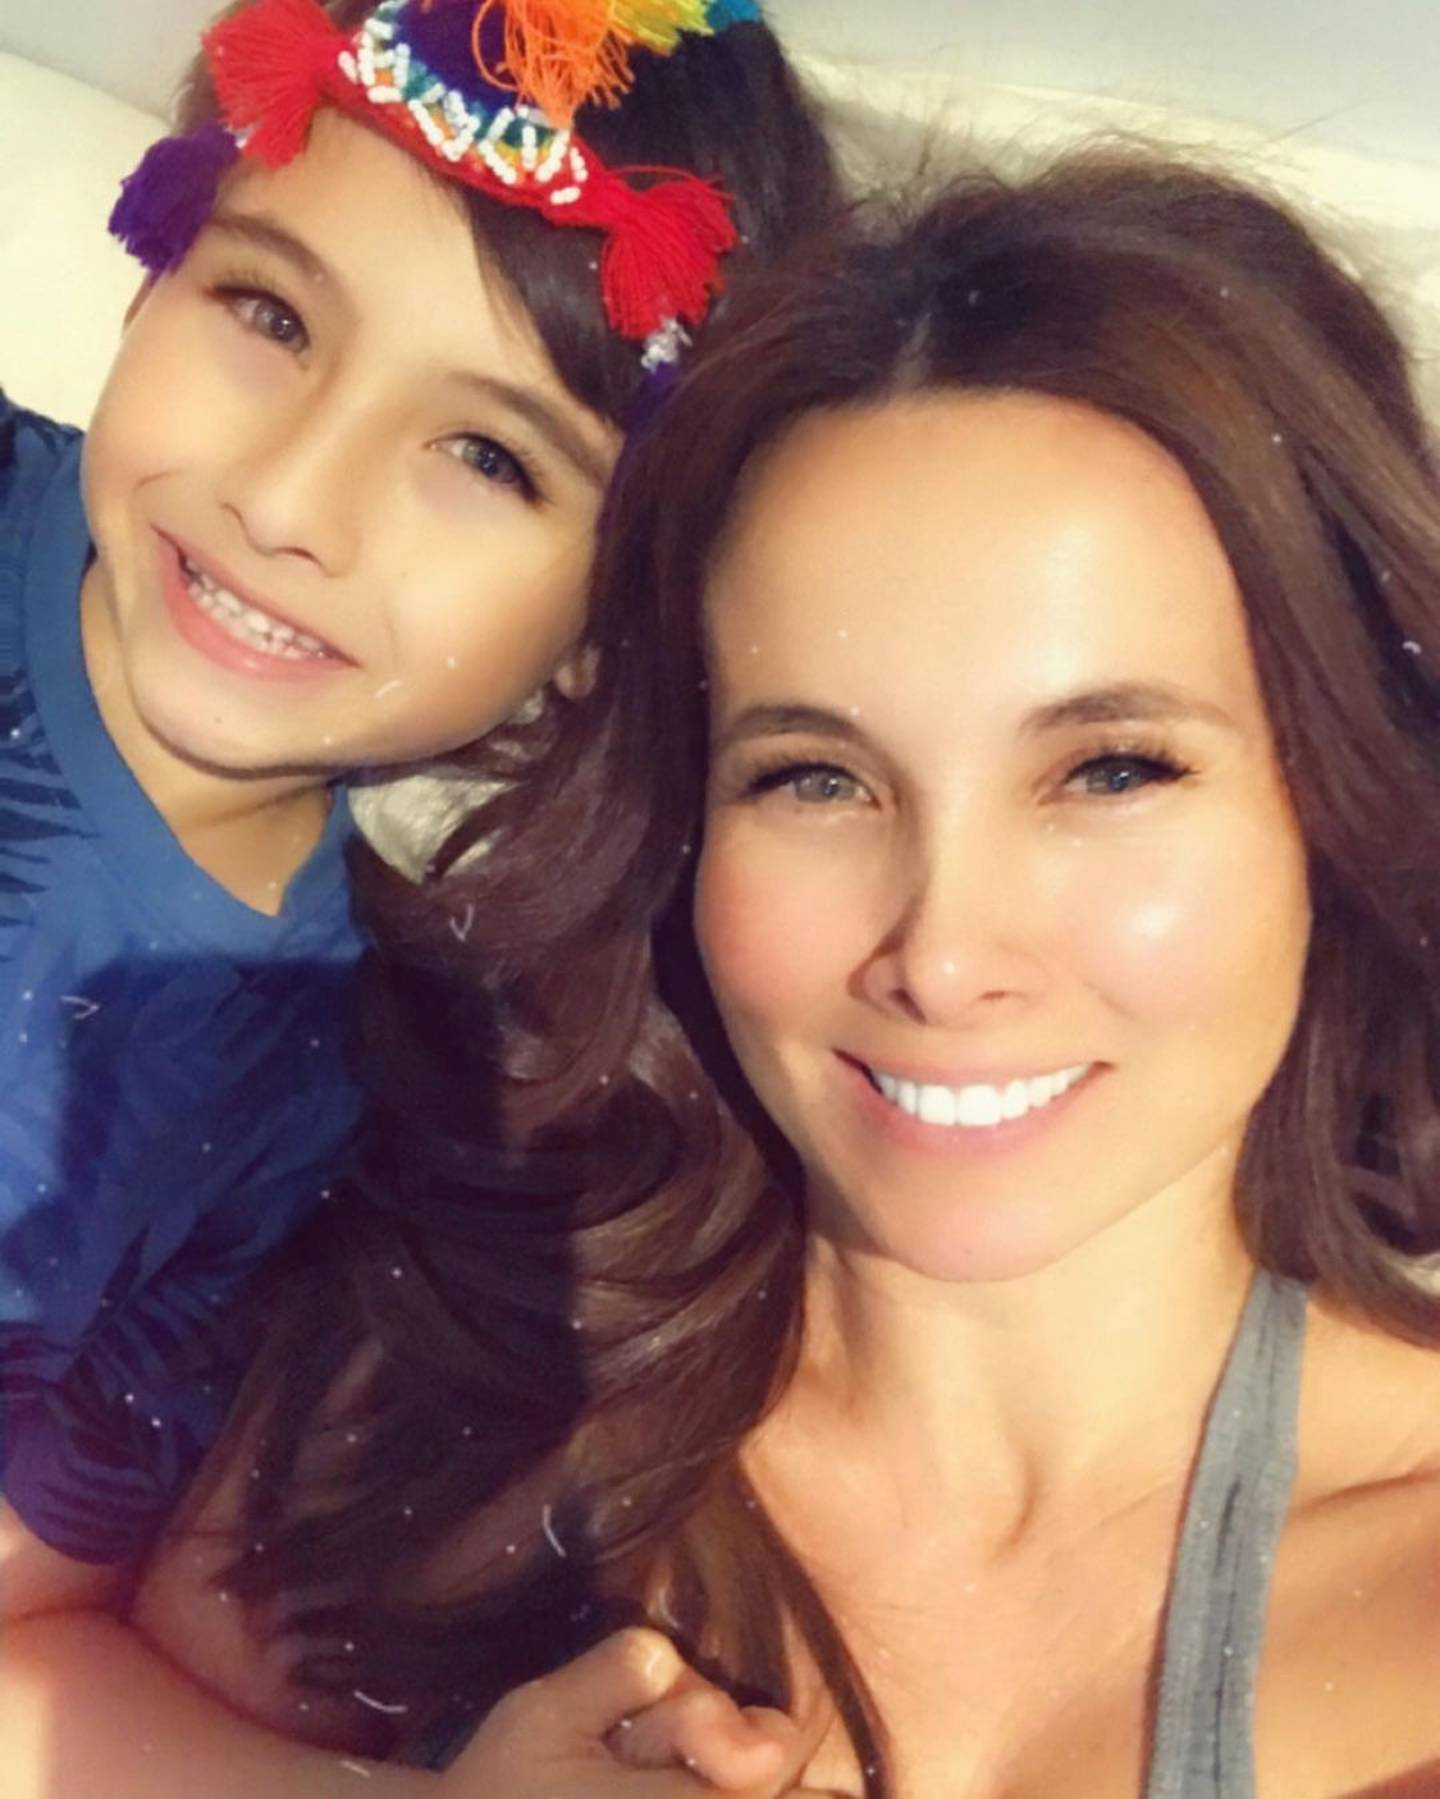 Sandra Beltran and her son, Luciano